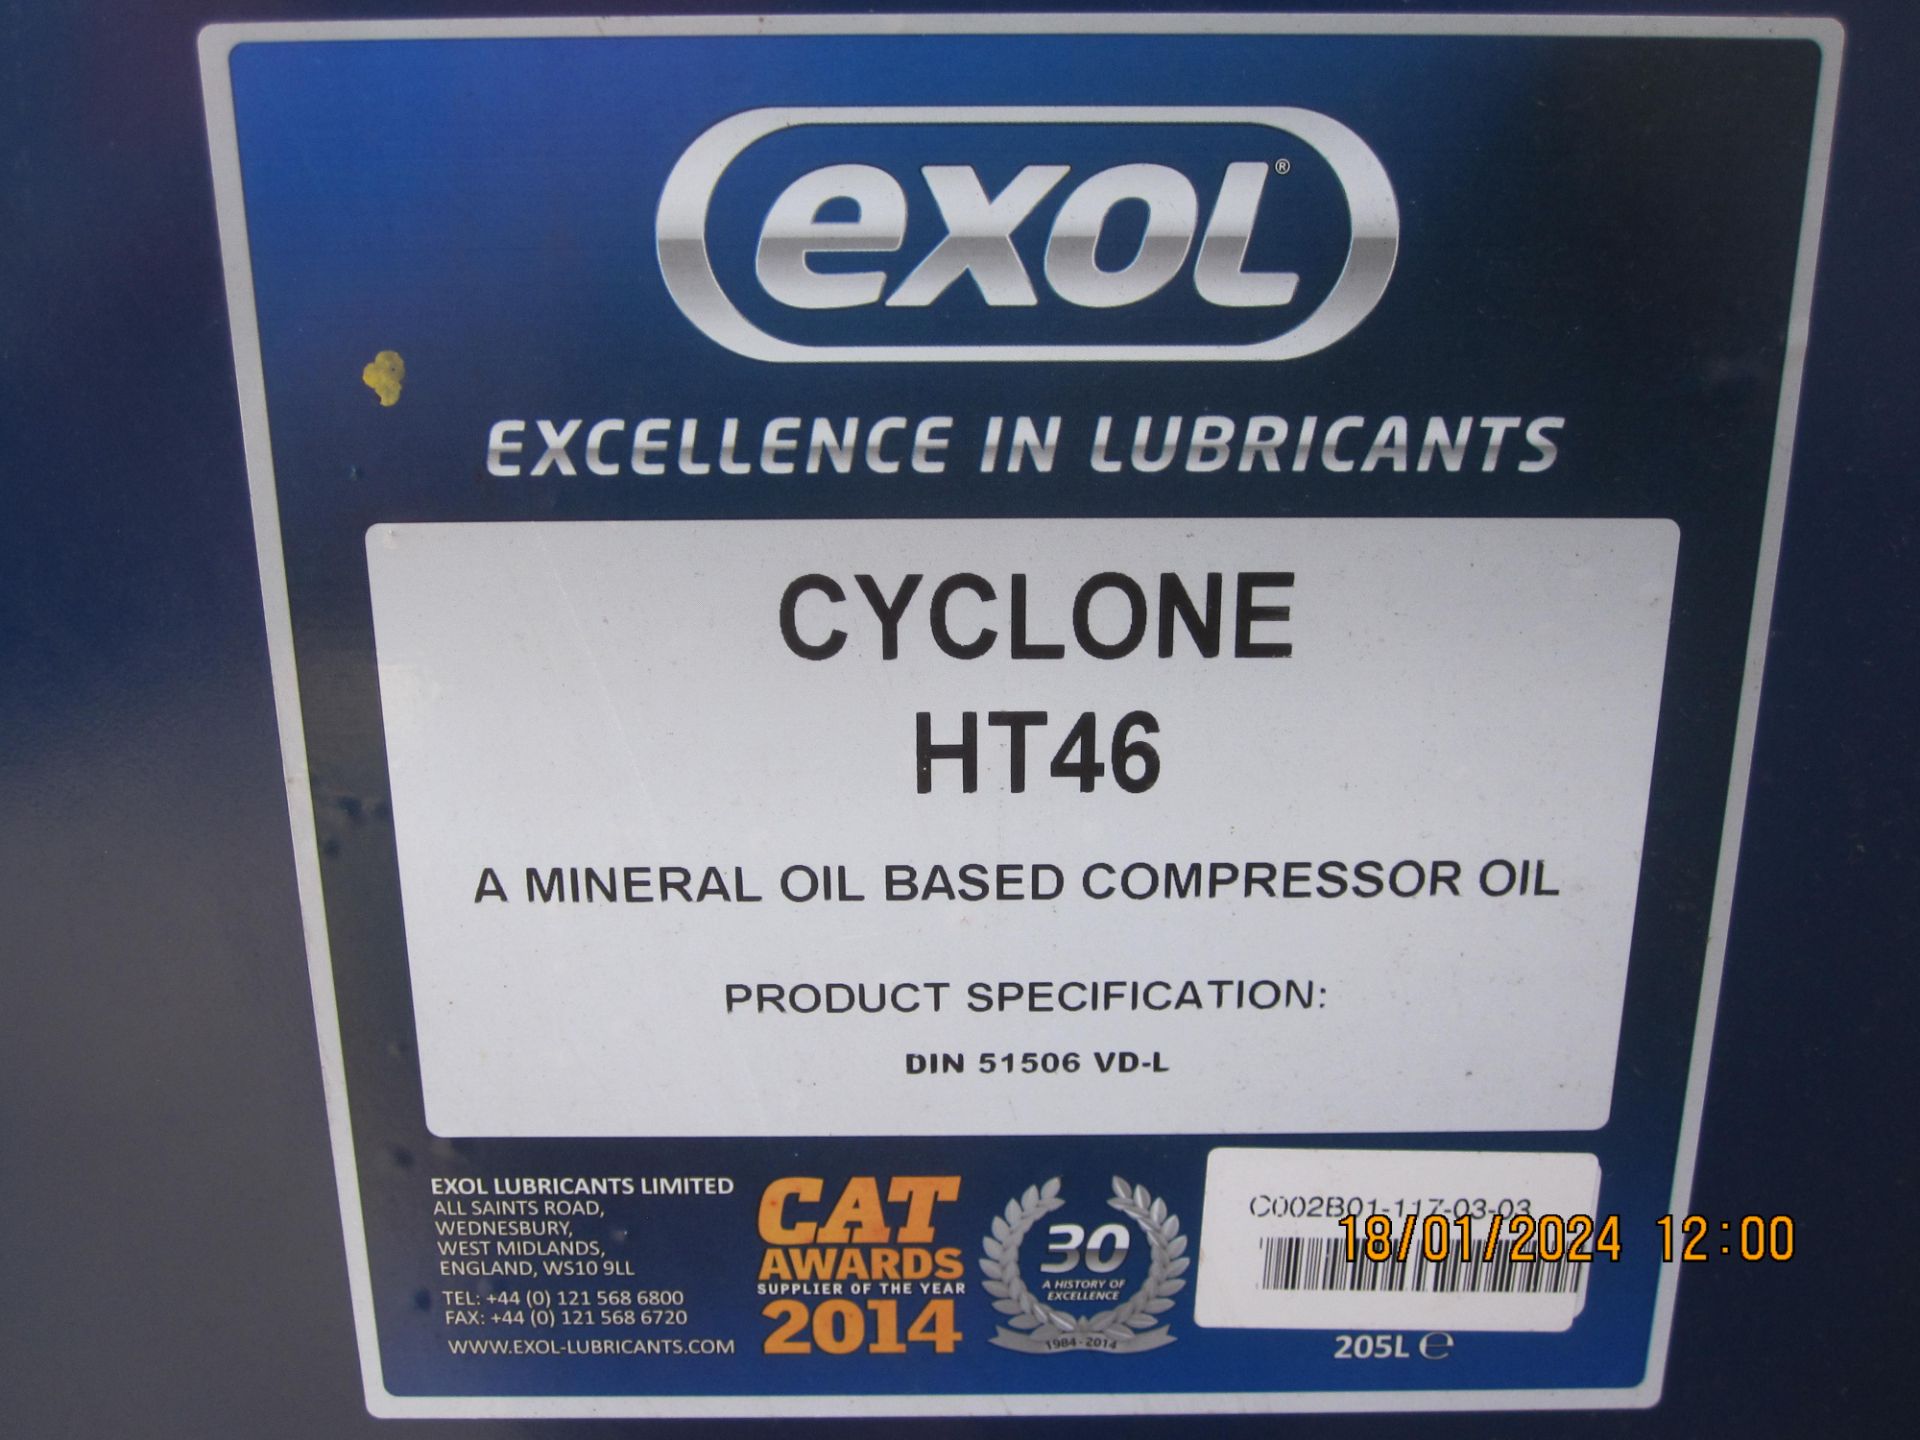 205litre drum Exol Cyclone HT46 Compressor Oil (dr - Image 2 of 2